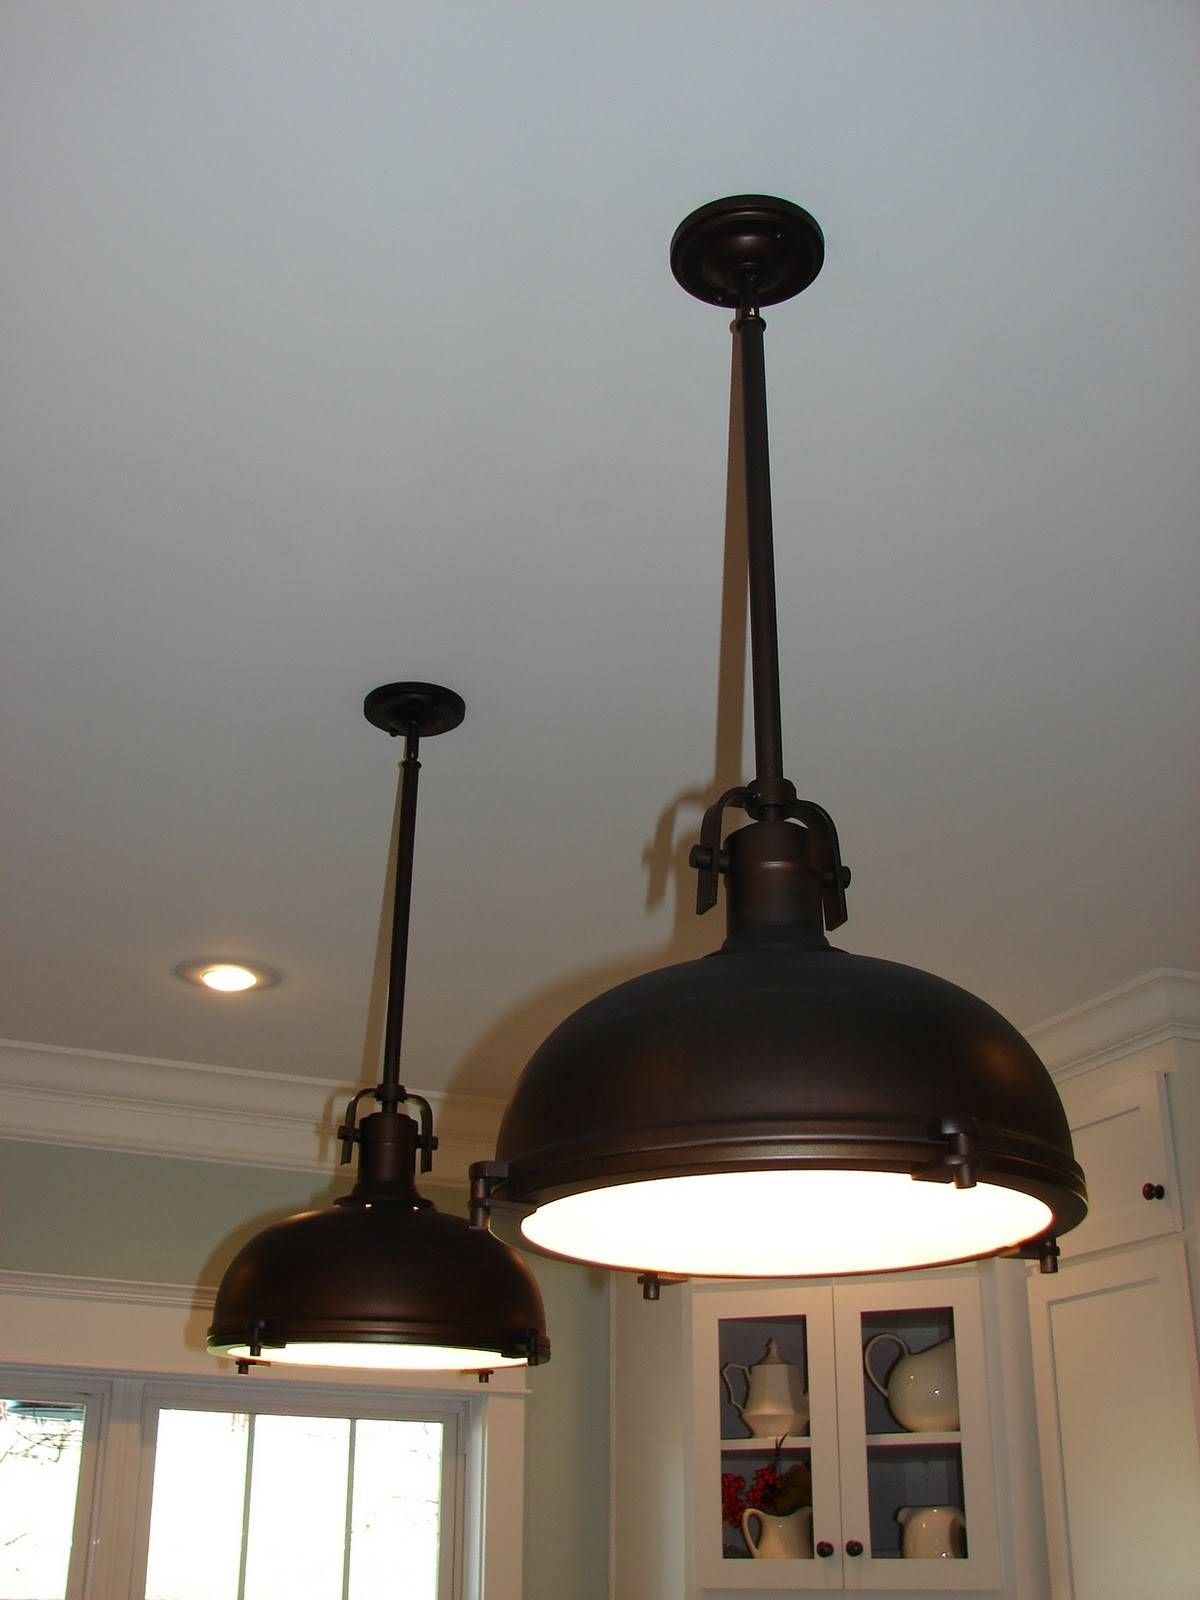 Interior Design: Awesome Lowes Light Fixtures Pendant Lighting For With Regard To Lowes Kitchen Pendant Lights (View 14 of 15)